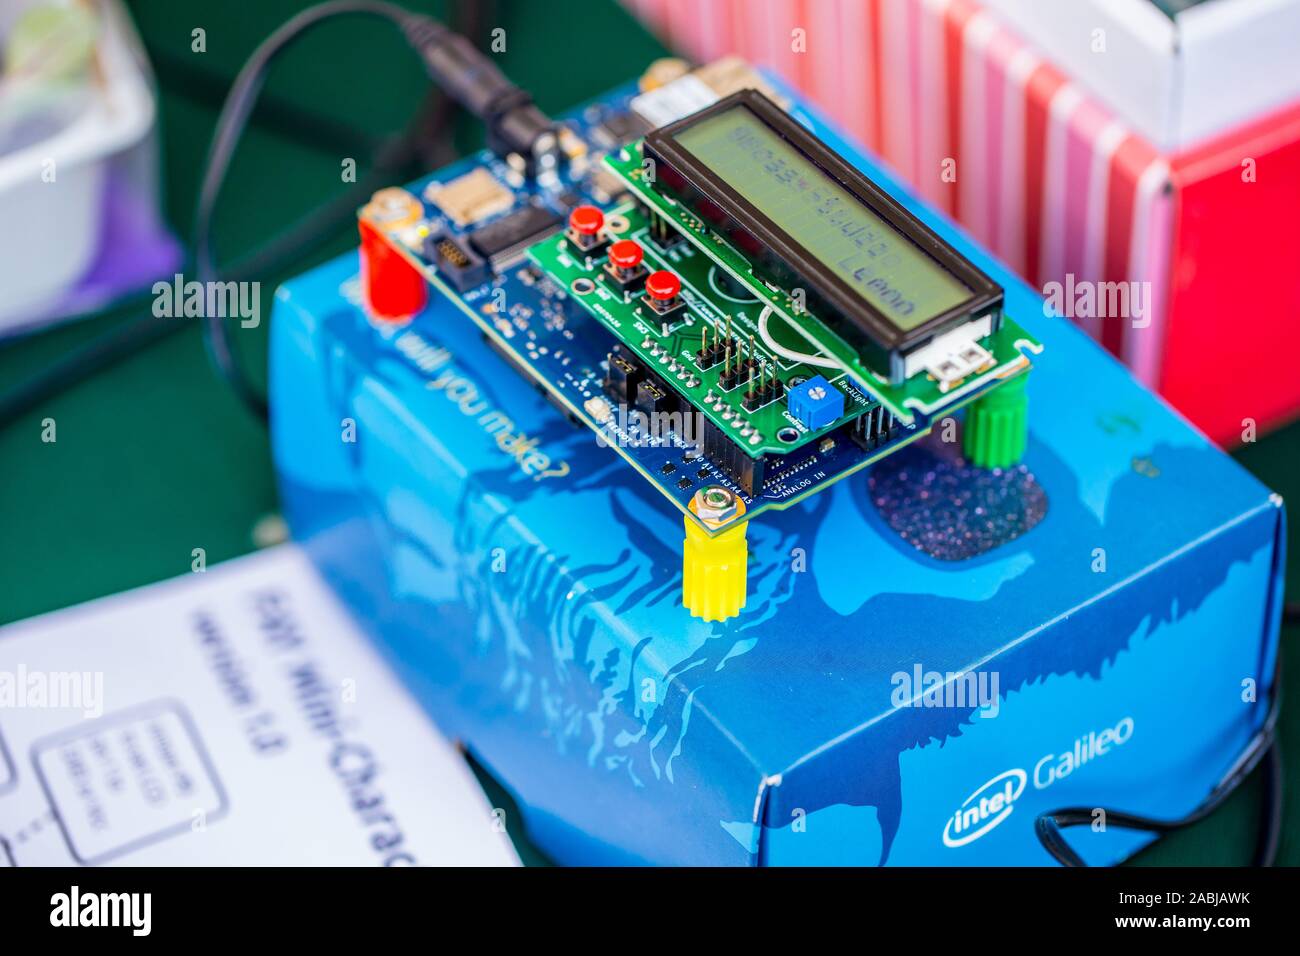 Intel Galileo, Intel's Arduino embedded system board for developer education or IoT maker based on Intel x86 32bits microcontroller show at public sal Stock Photo